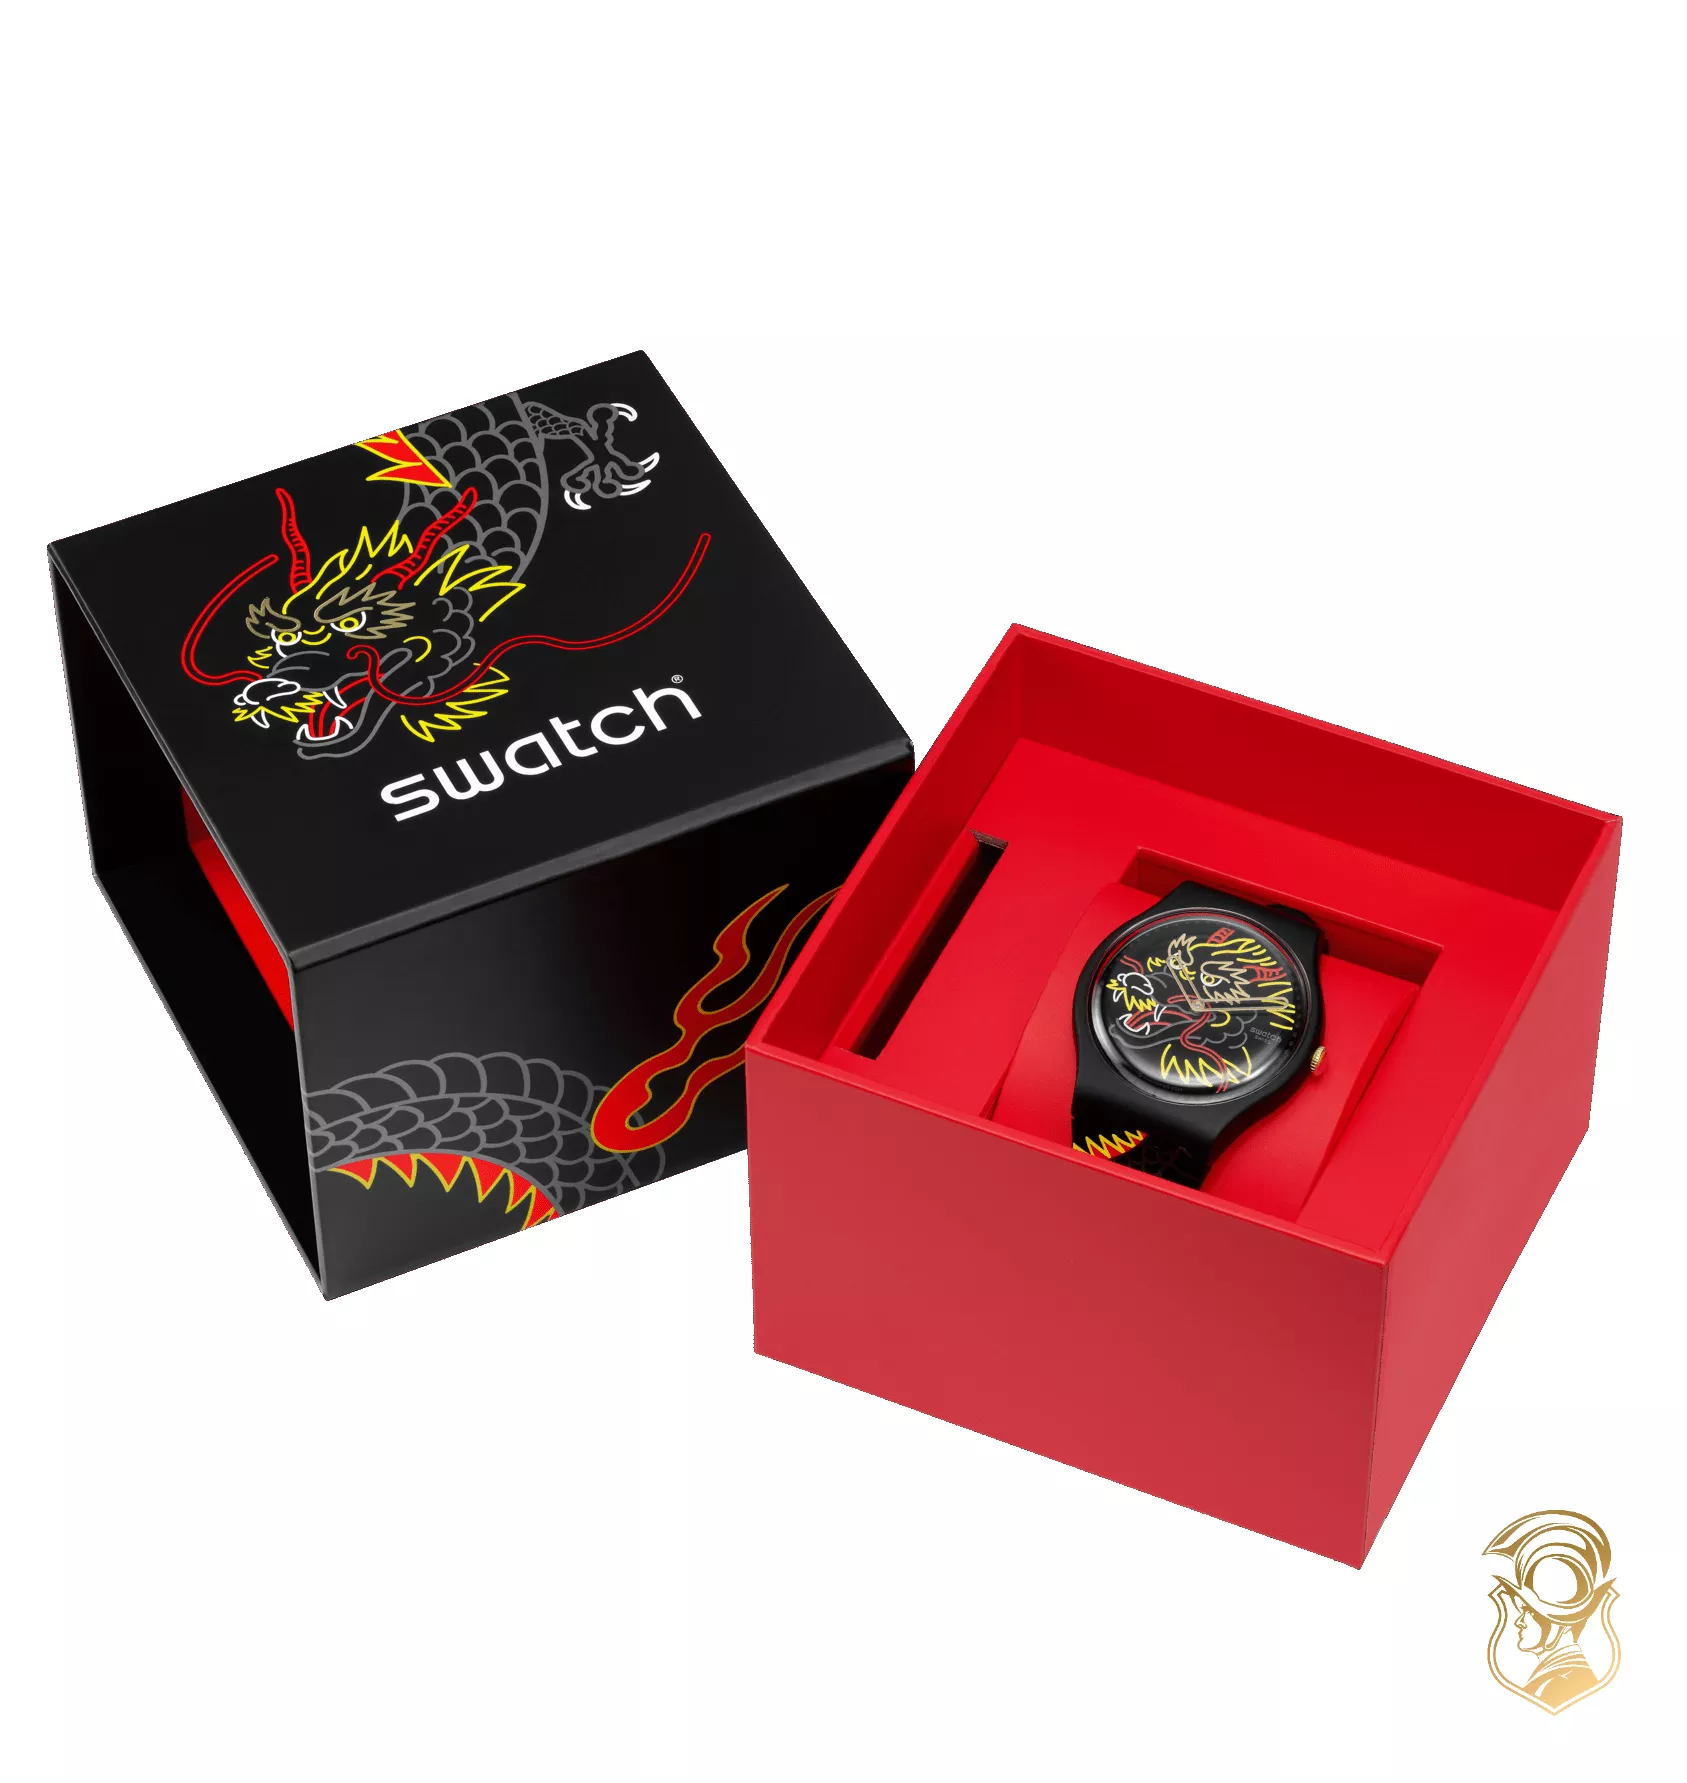 Swatch Dragon In Wind Pay Watch 41MM